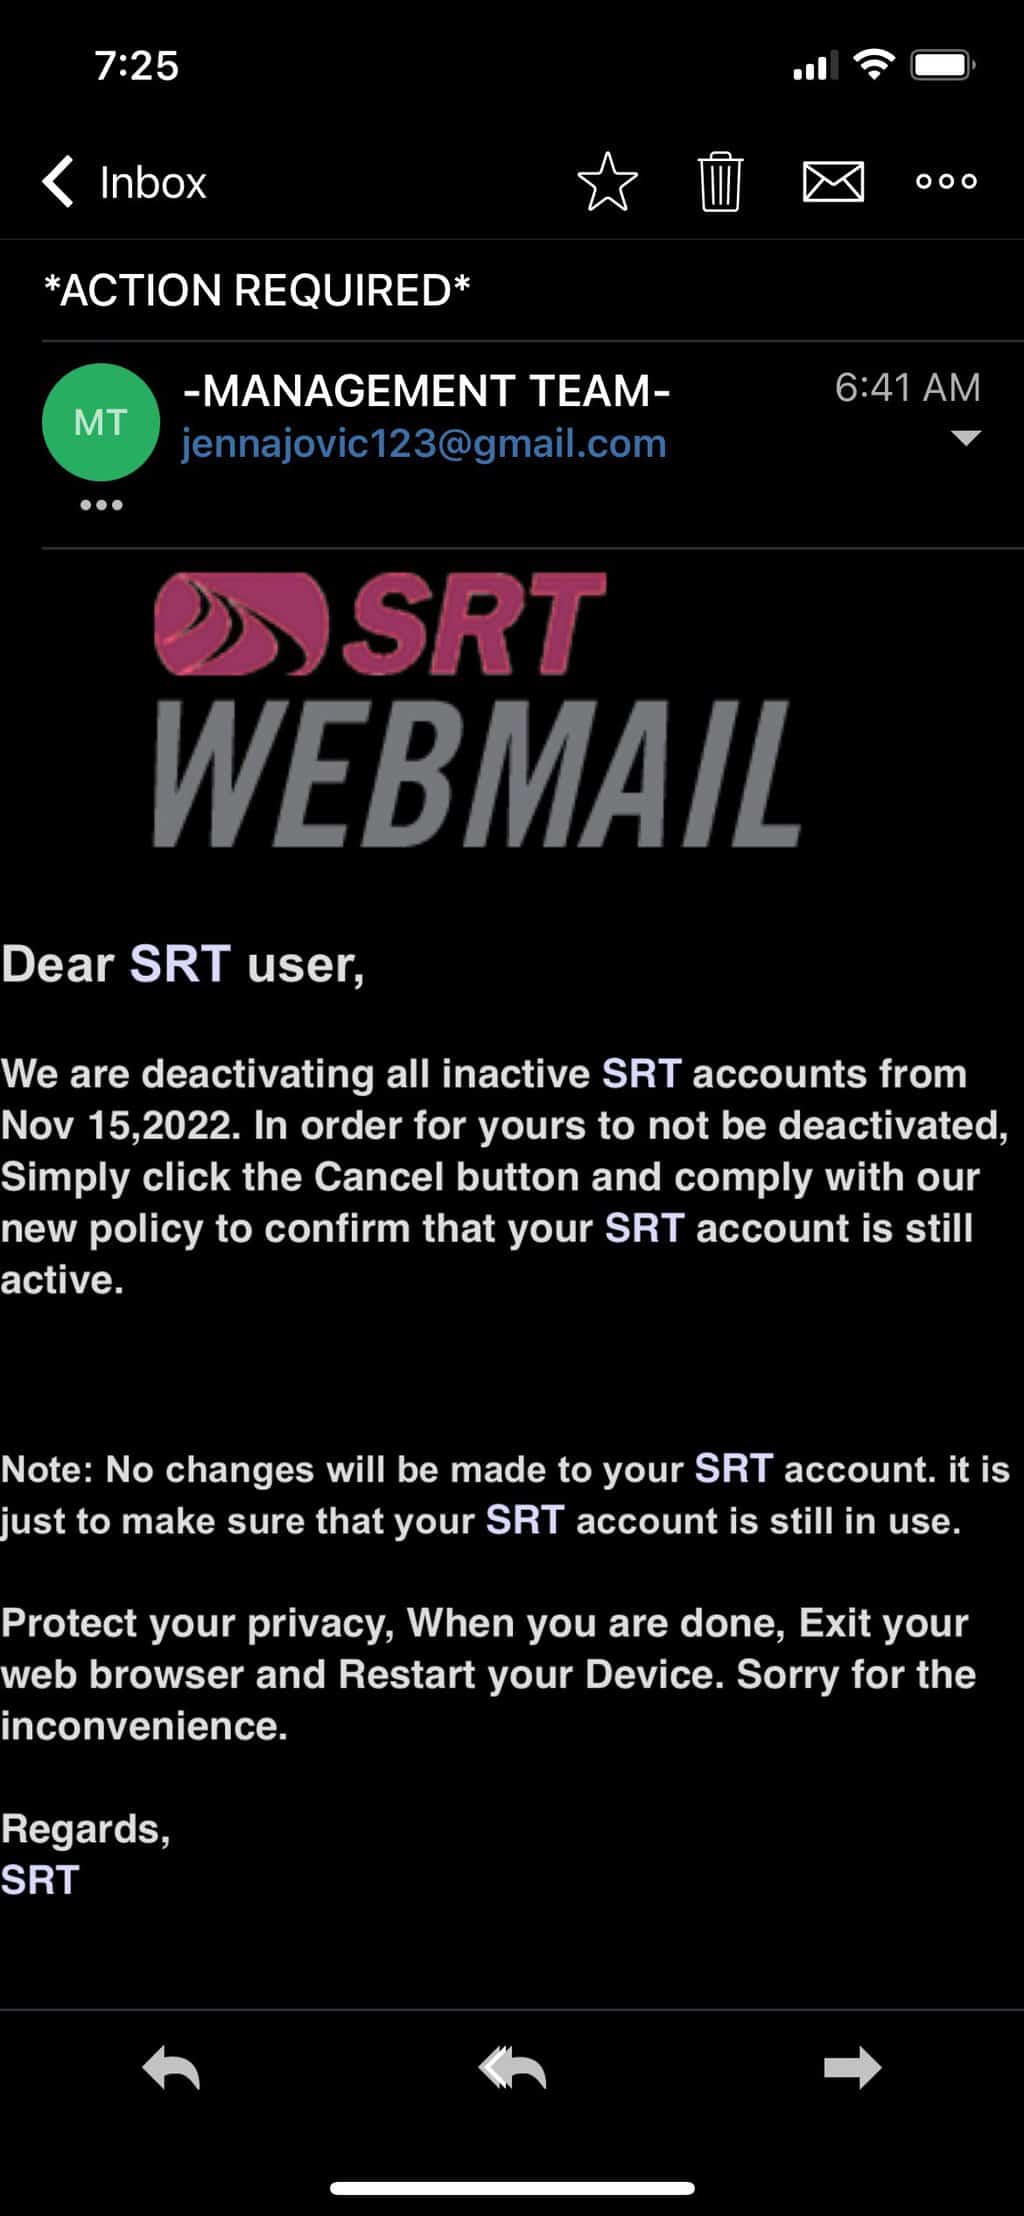 an example of a phishing email to SRT customers